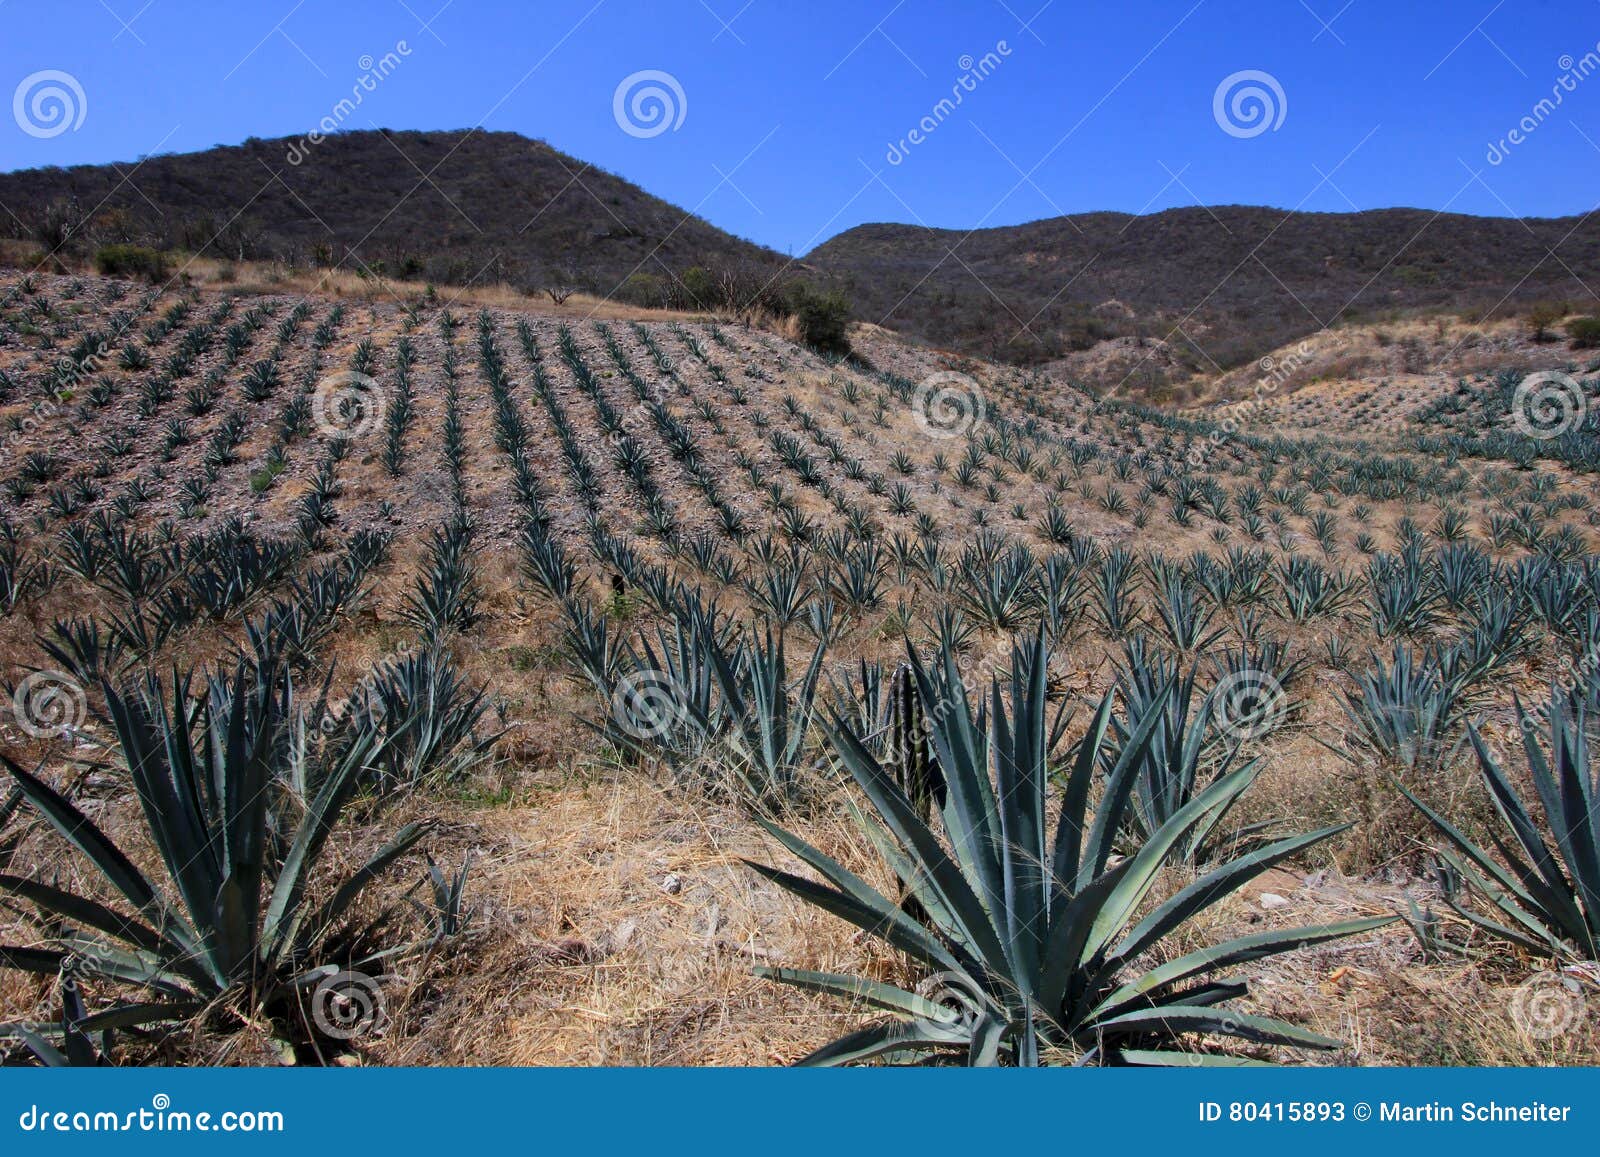 maguey plants field to produce mezcal, mexico